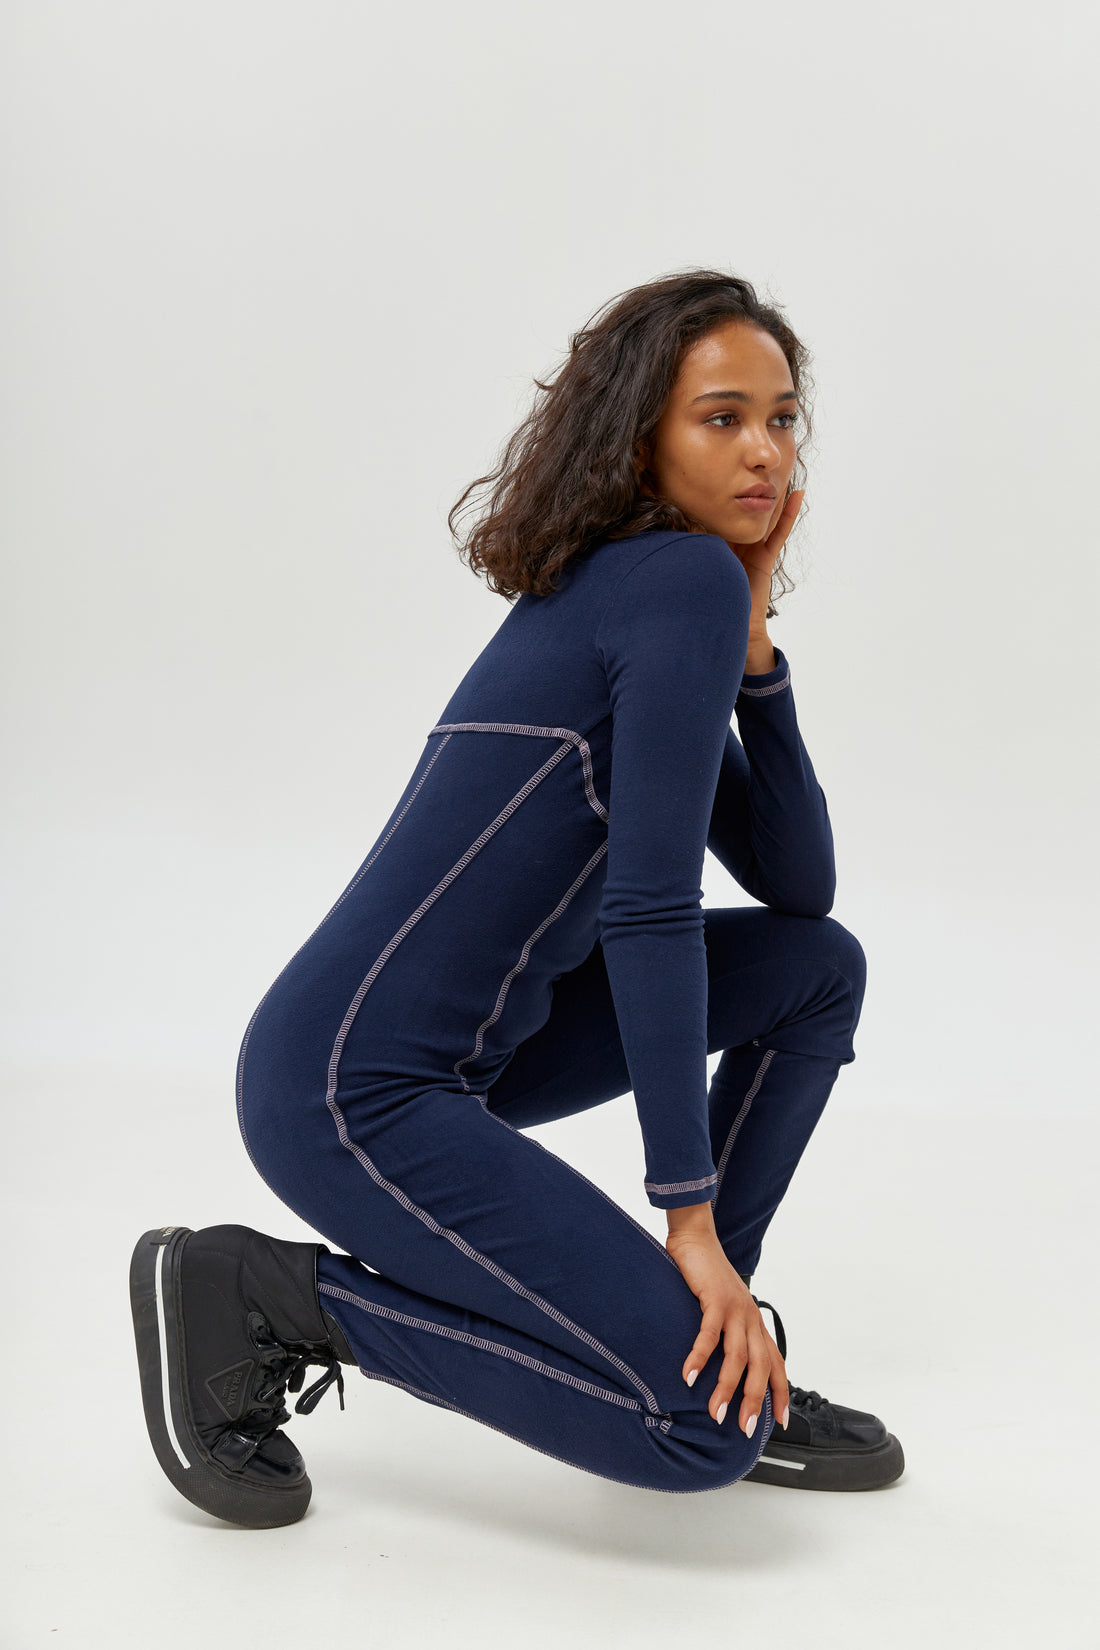 Base layer black jumpsuit - Thermal underwear navy blue one piece - Long johns for women